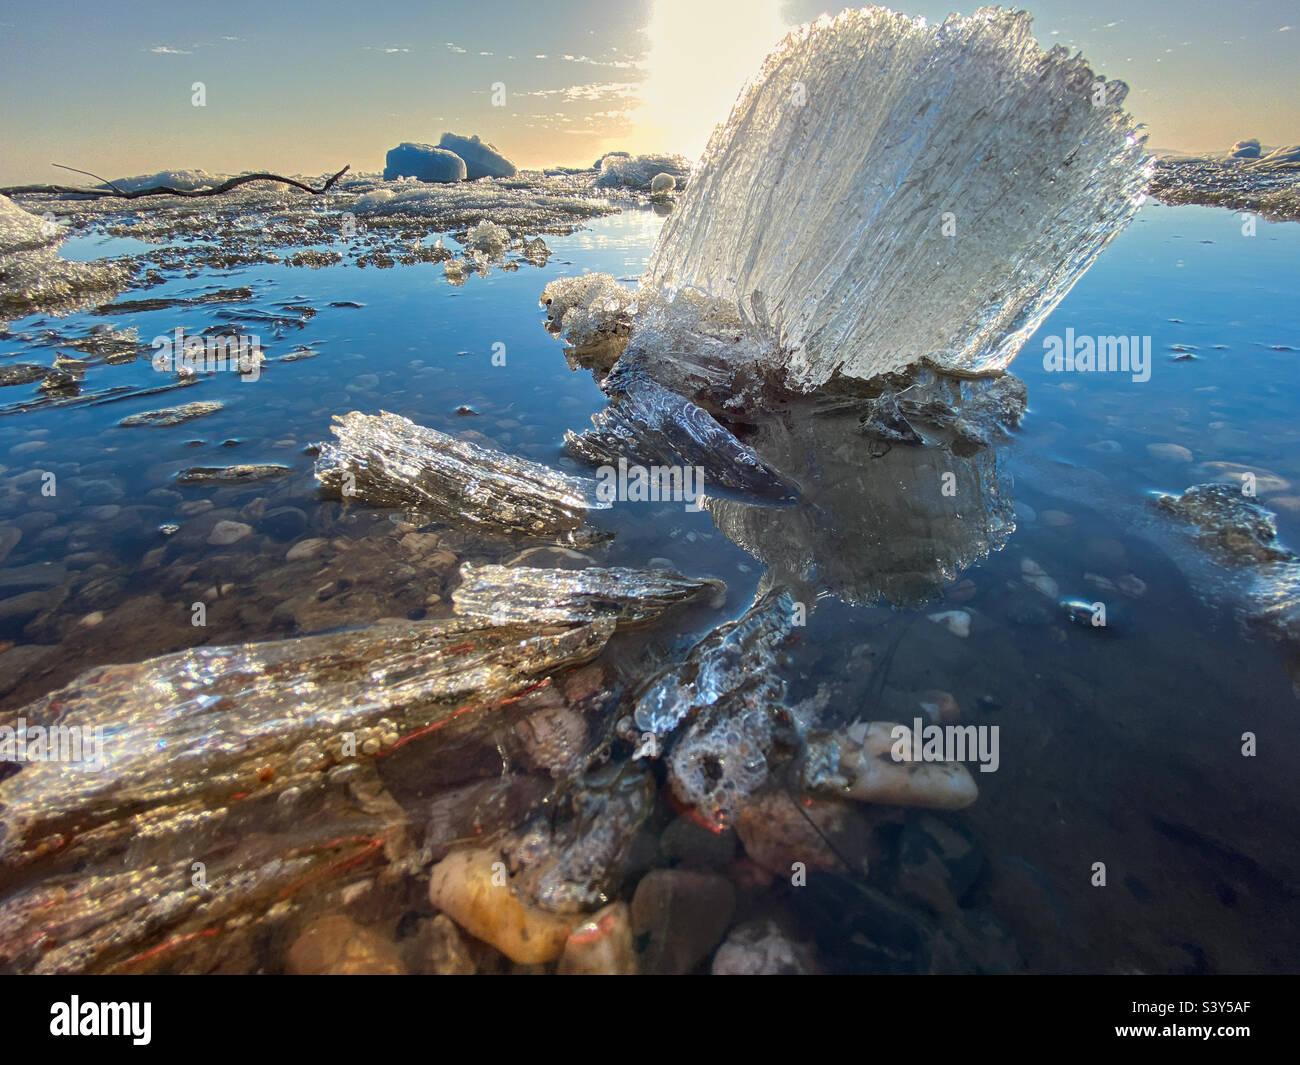 Beached ice crystal columns from melted ice floes during the annual spring thaw/break up in the arctic waters of Kotzebue Sound, Northwest Arctic Borough, Alaska, USA. Stock Photo